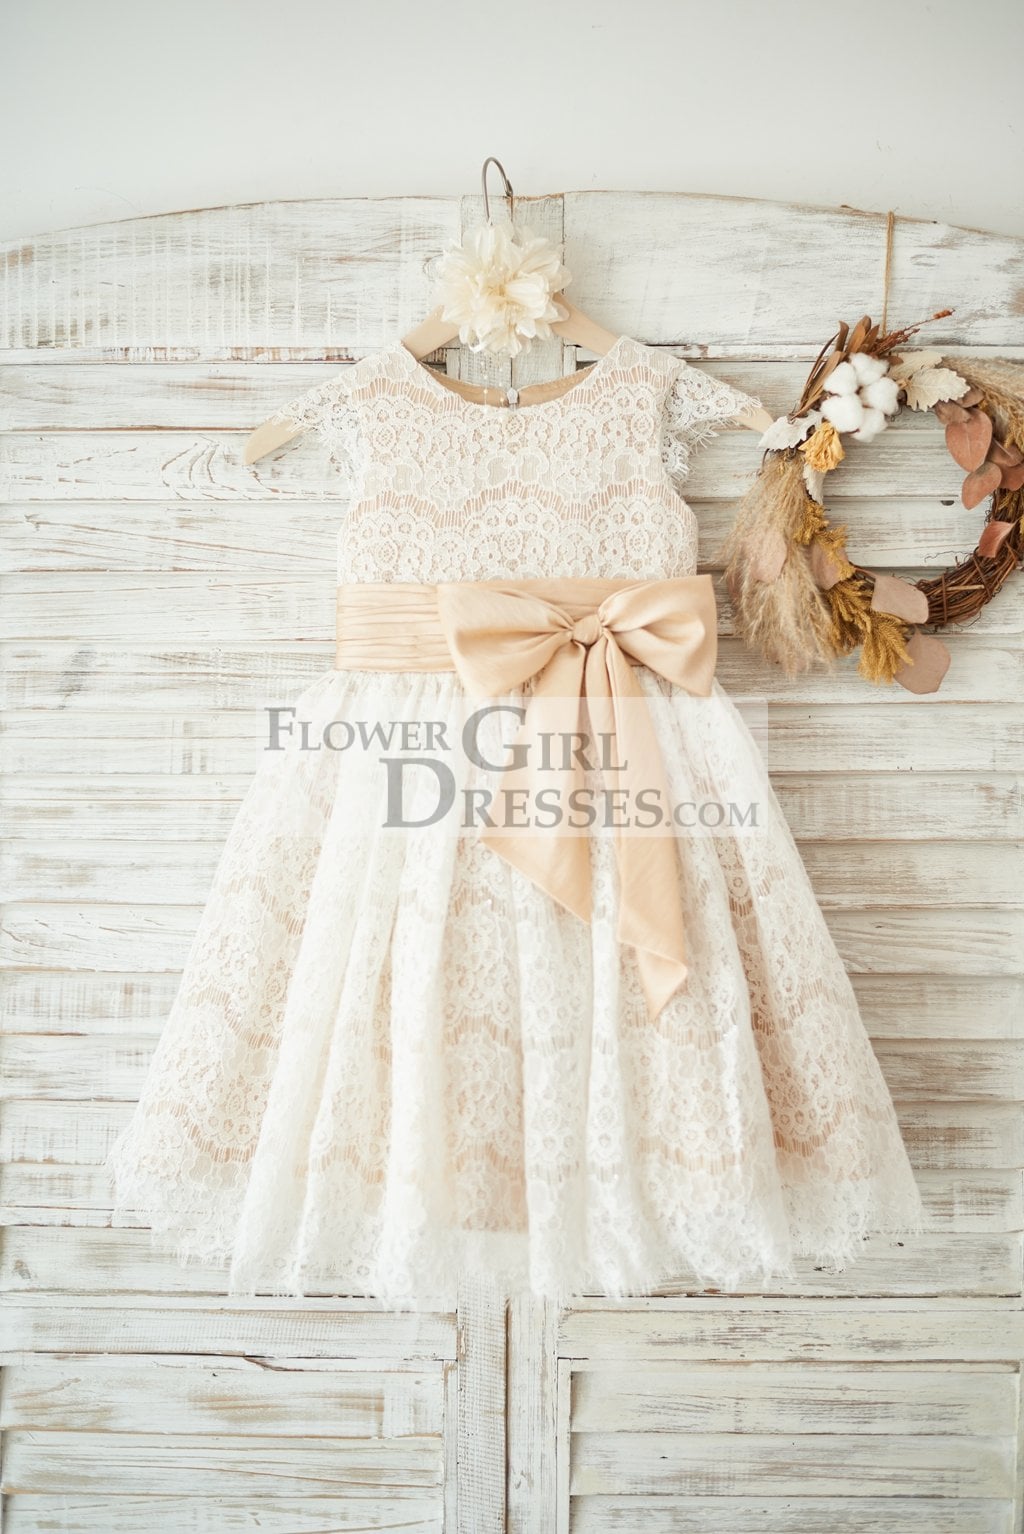 Champagne Satin Ivory Lace Cap Sleeves Wedding Flower Girl Dress with Bow Belt